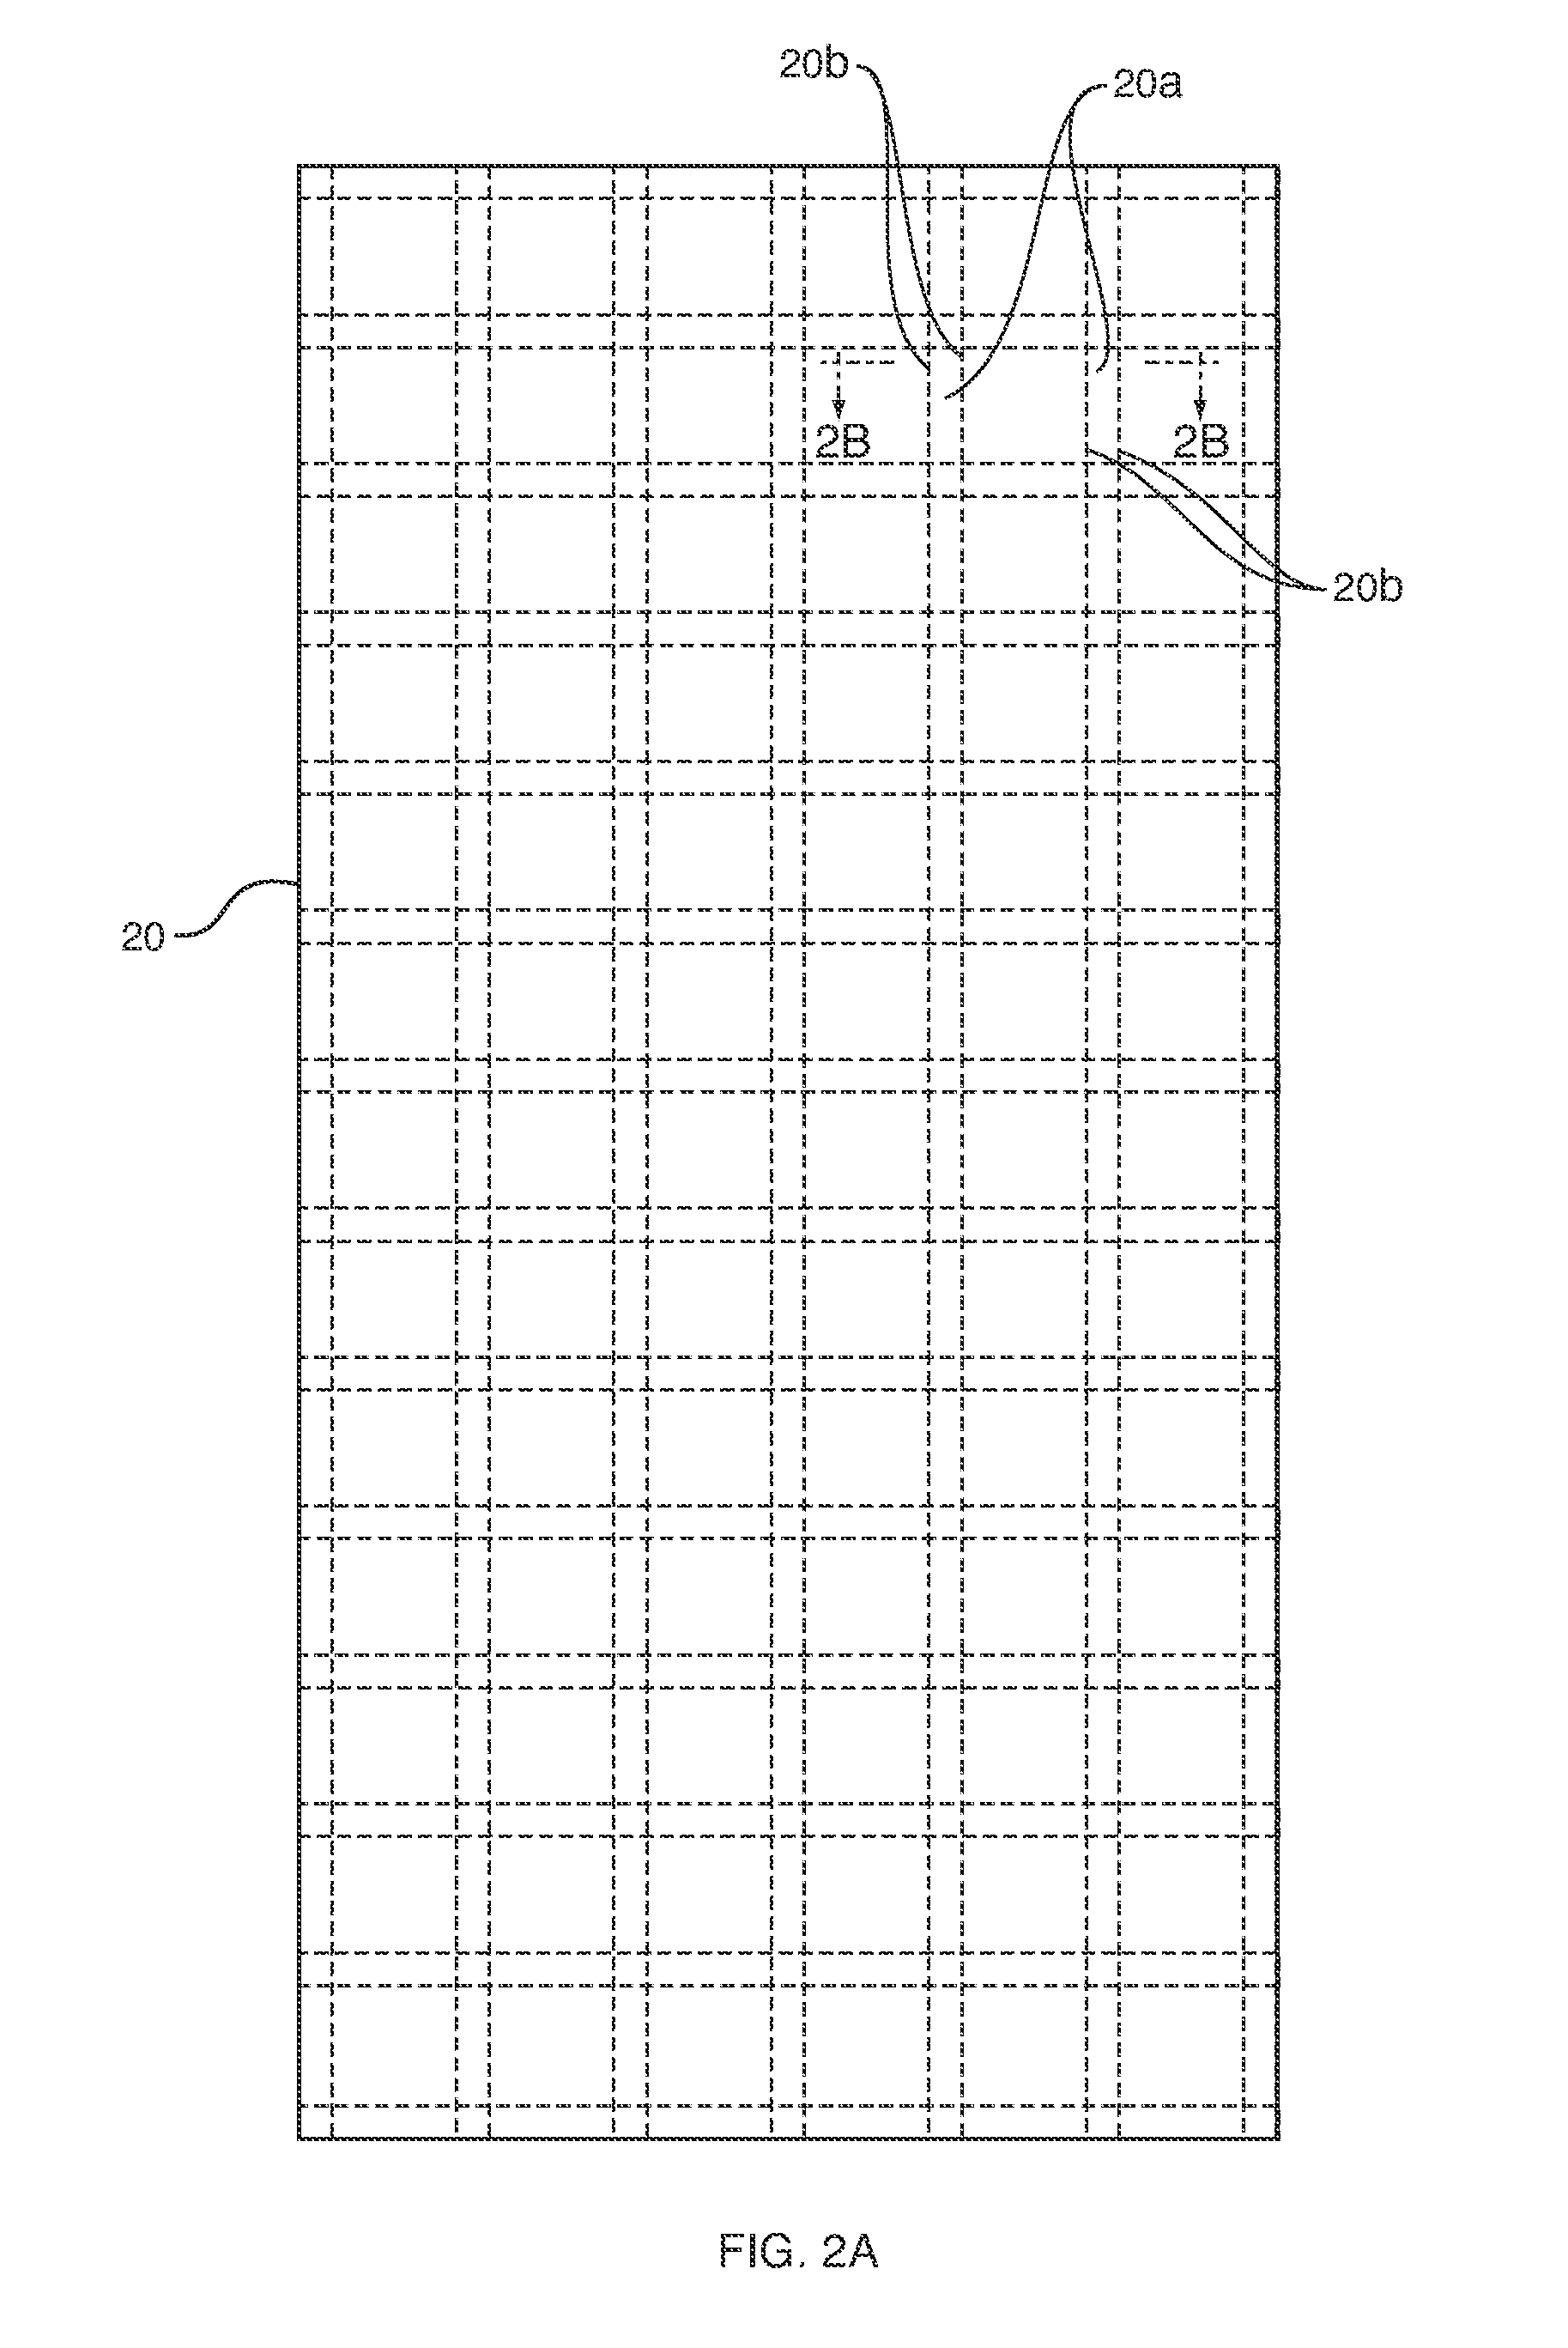 Low permeance segmented insulative device and related kit